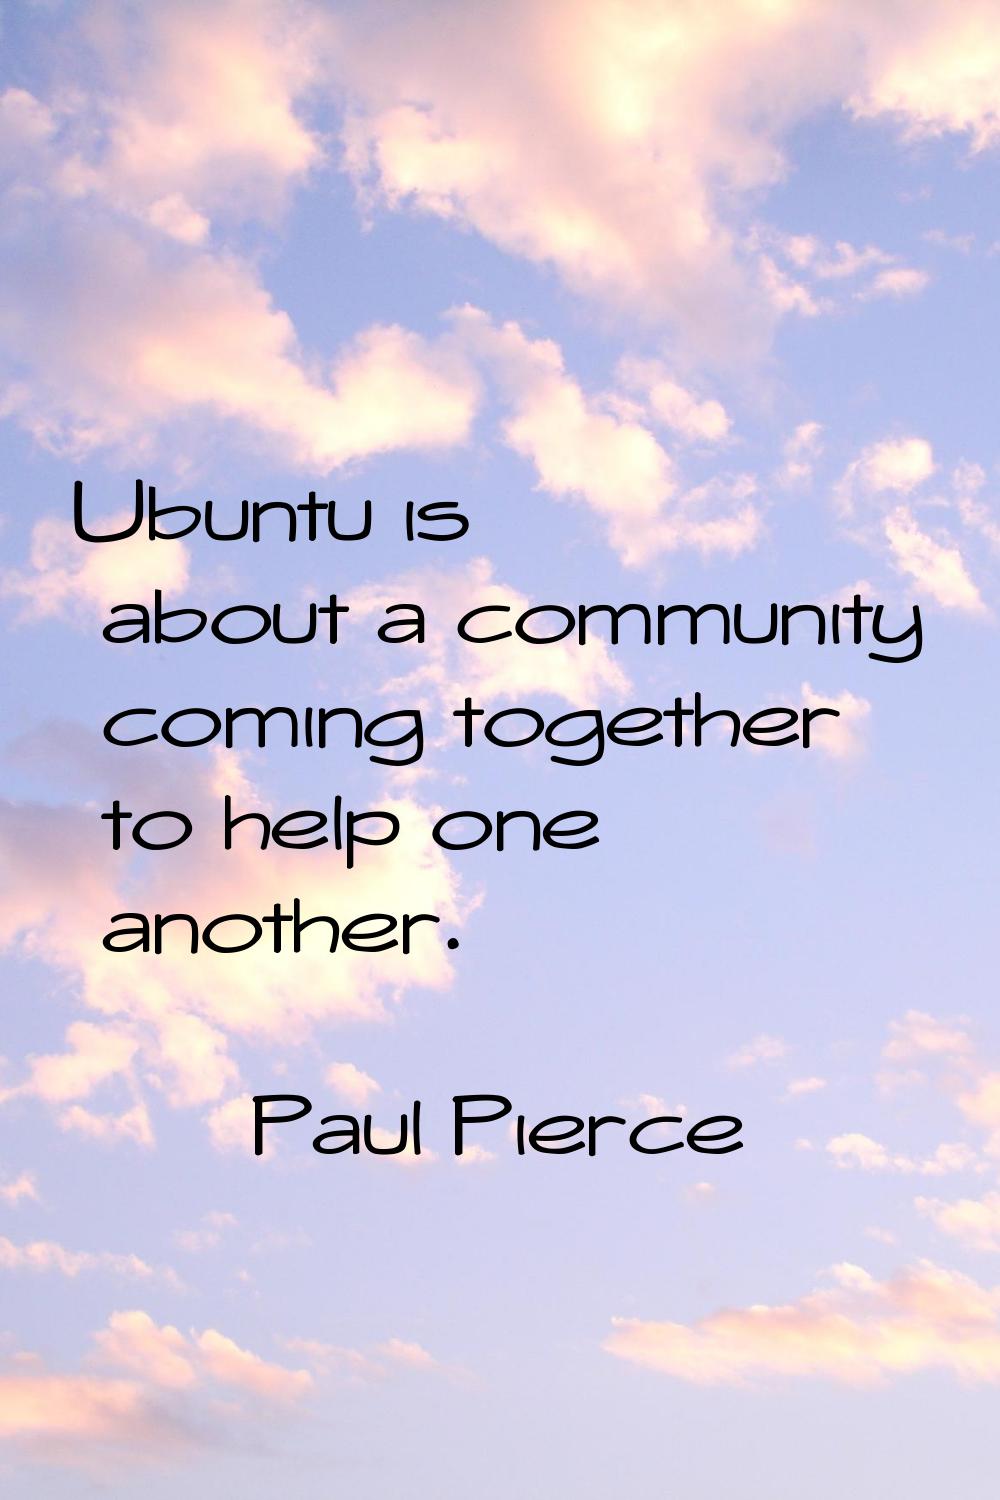 Ubuntu is about a community coming together to help one another.